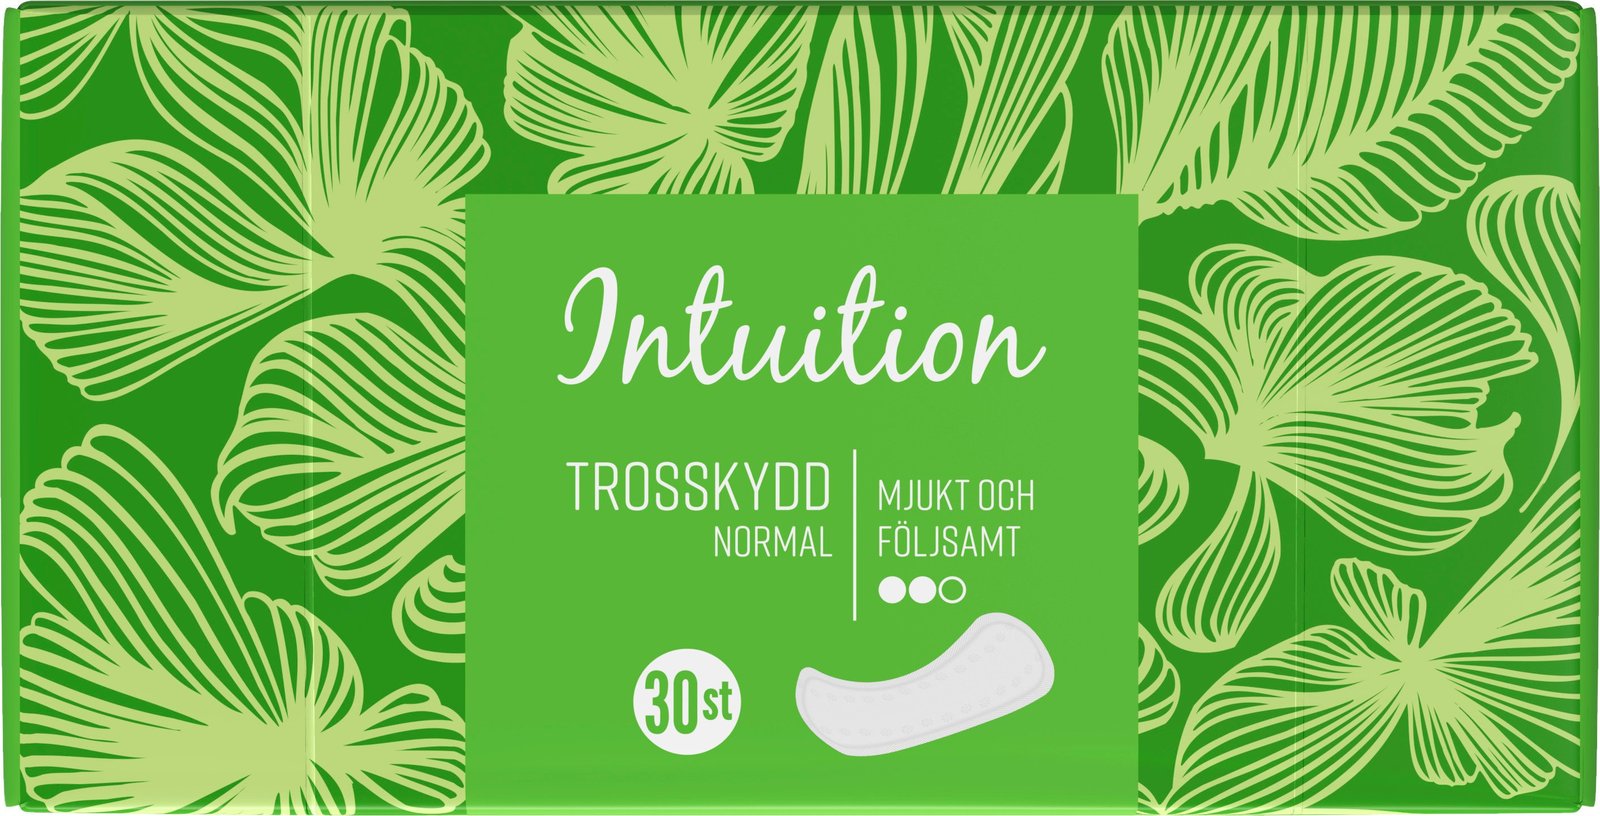 Intuition Normal Trosskydd 30 st